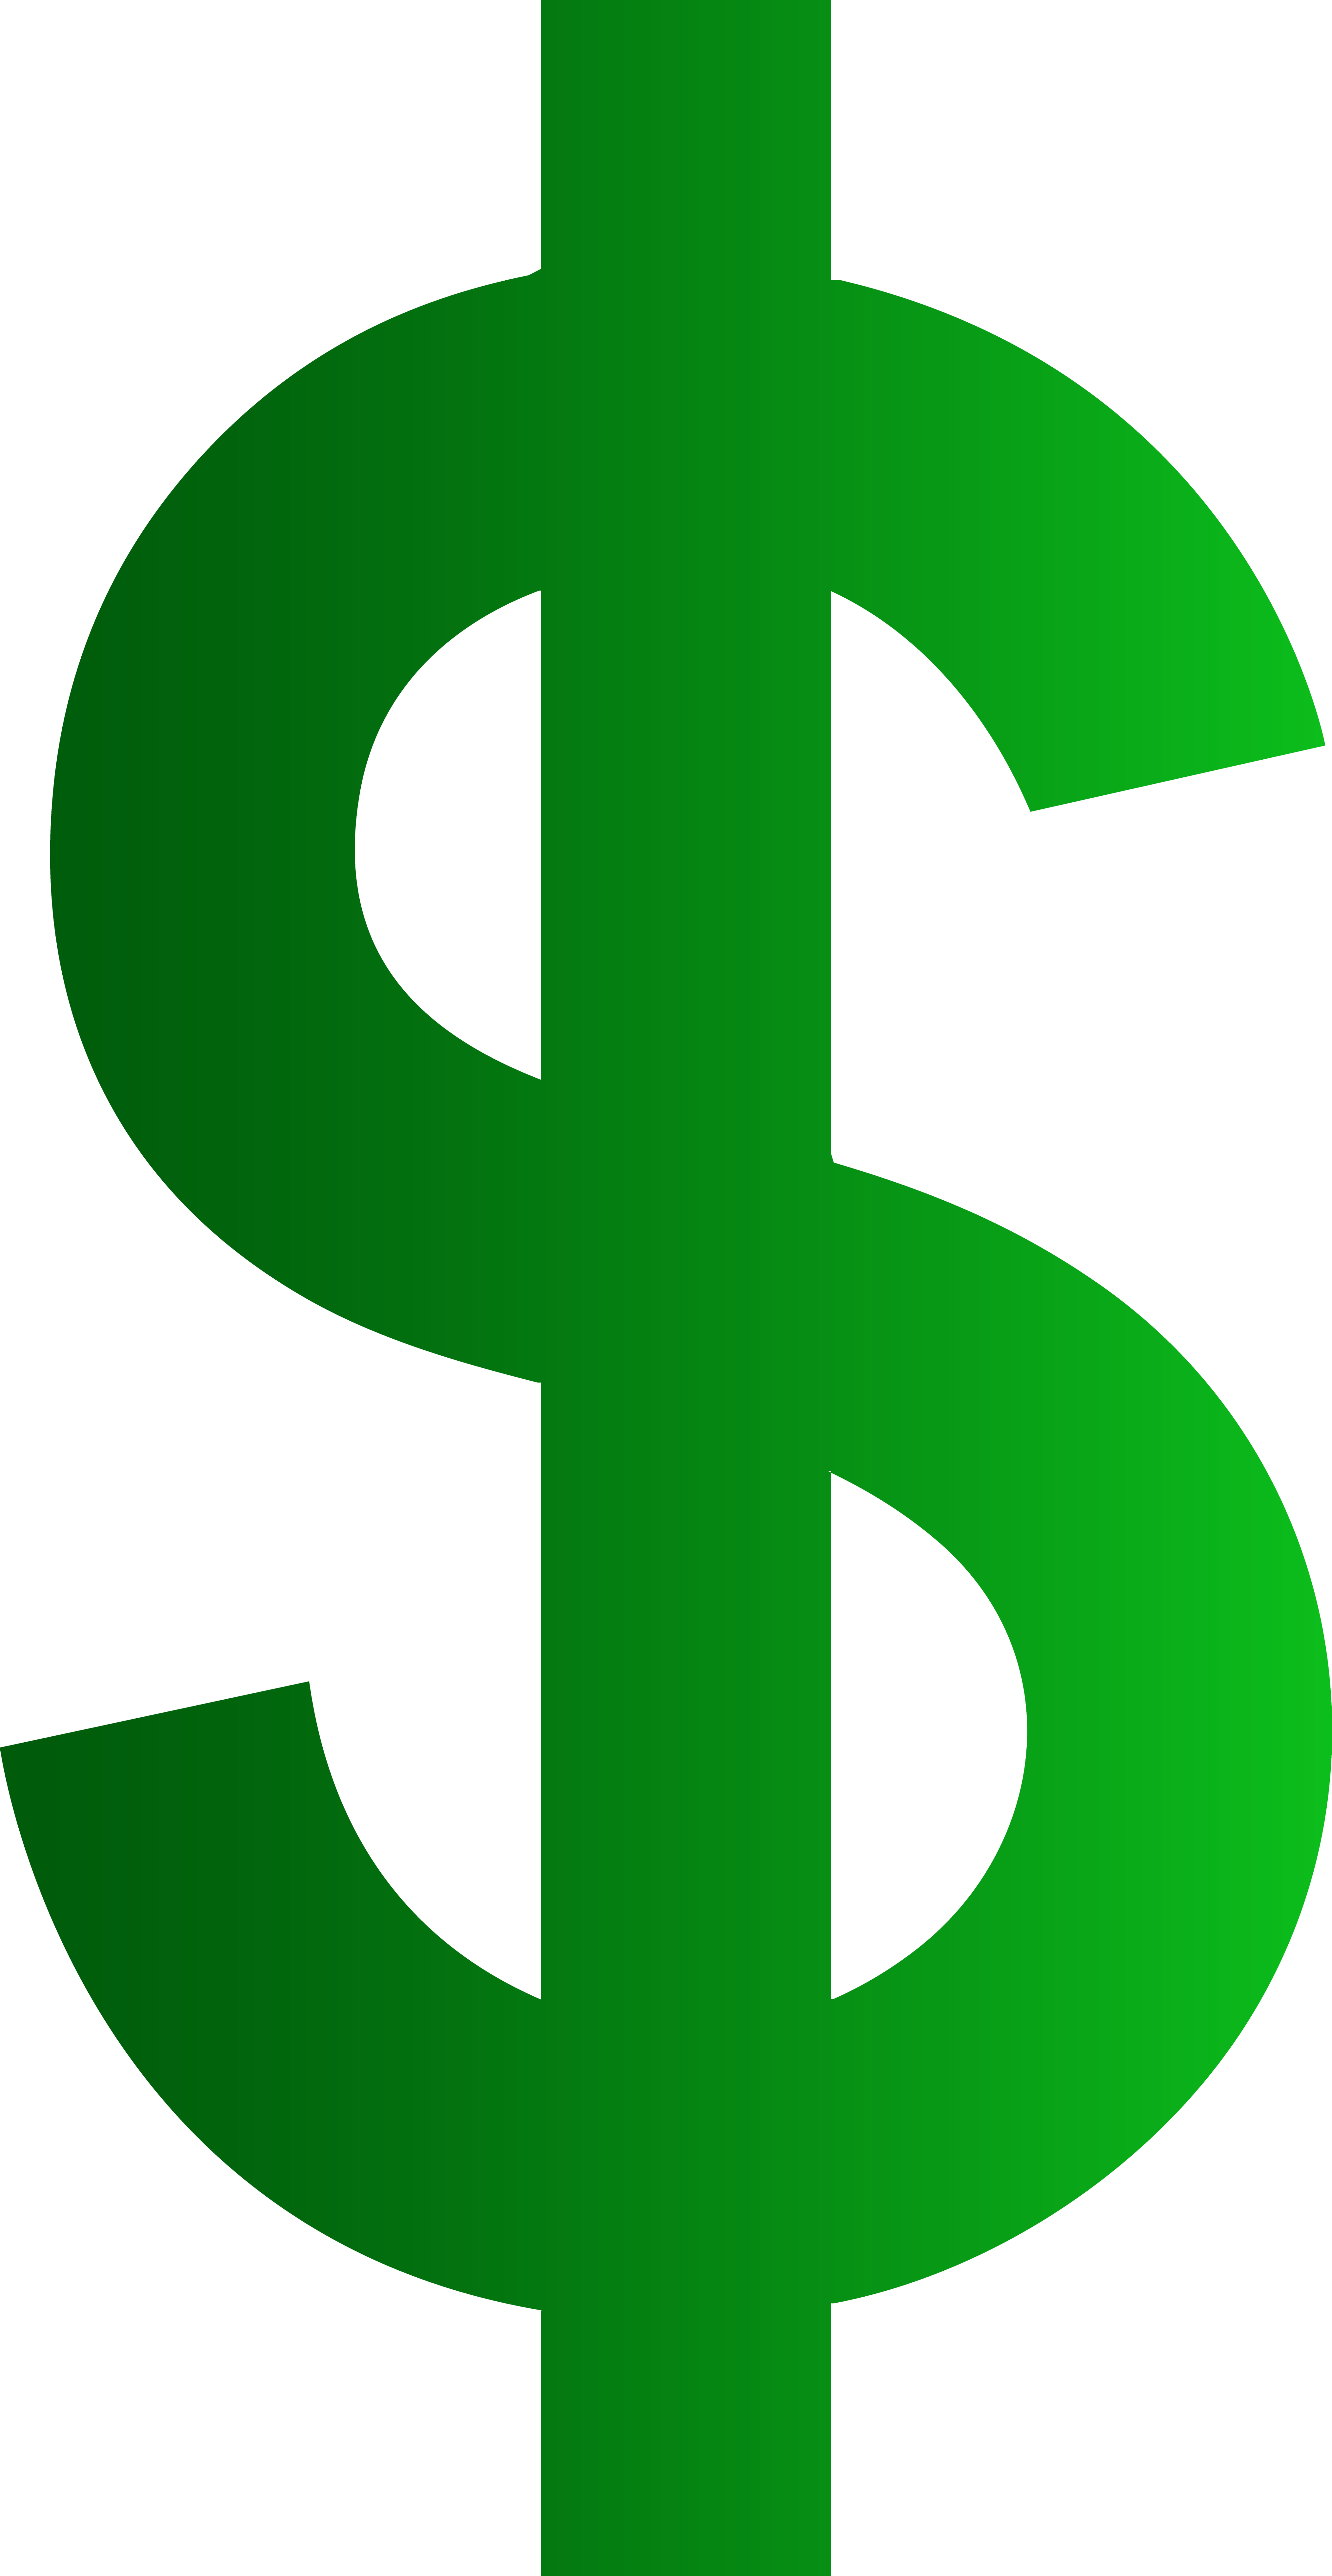 Picture Of Dollar Sign Clipart - Free to use Clip Art Resource